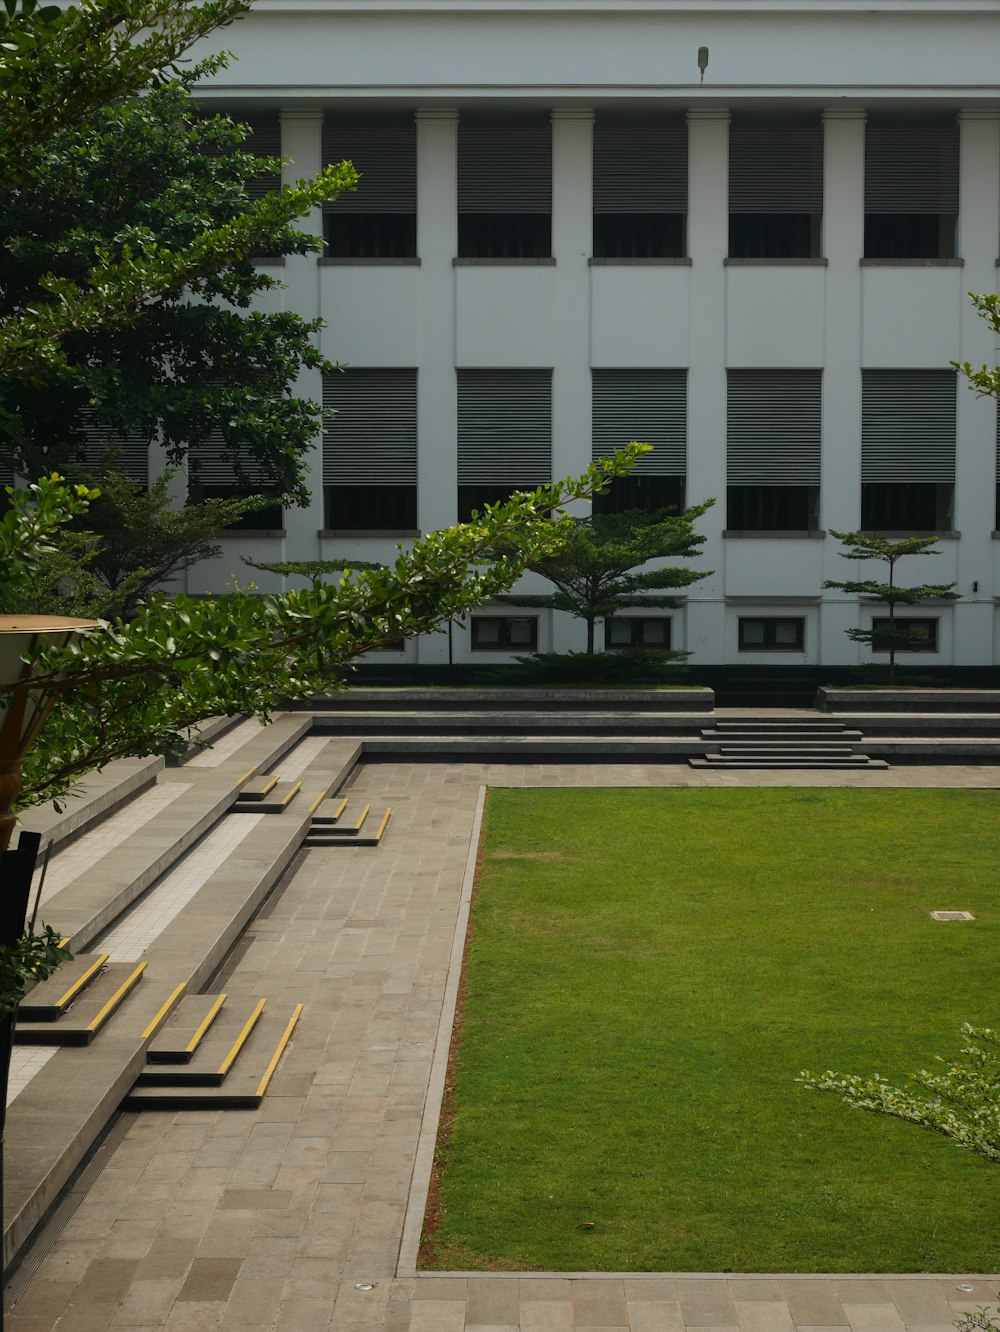 a grassy area with benches and trees in front of a building